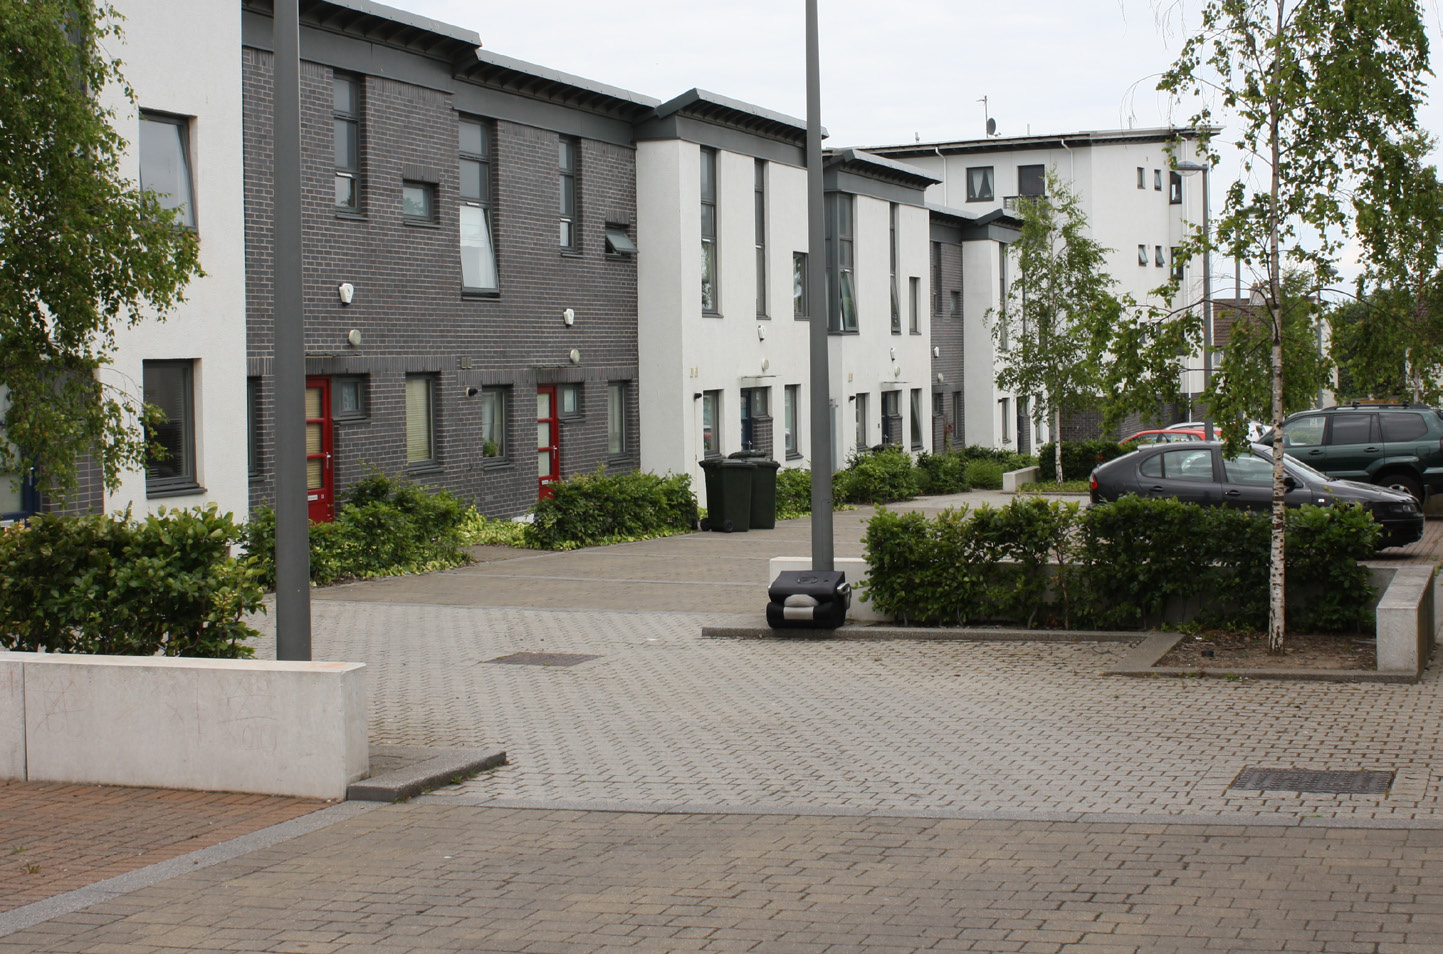 A modern two-storey house mews street with street trees, hedges and four parked cars pictured. The homes are a mixture of white and dark grey.